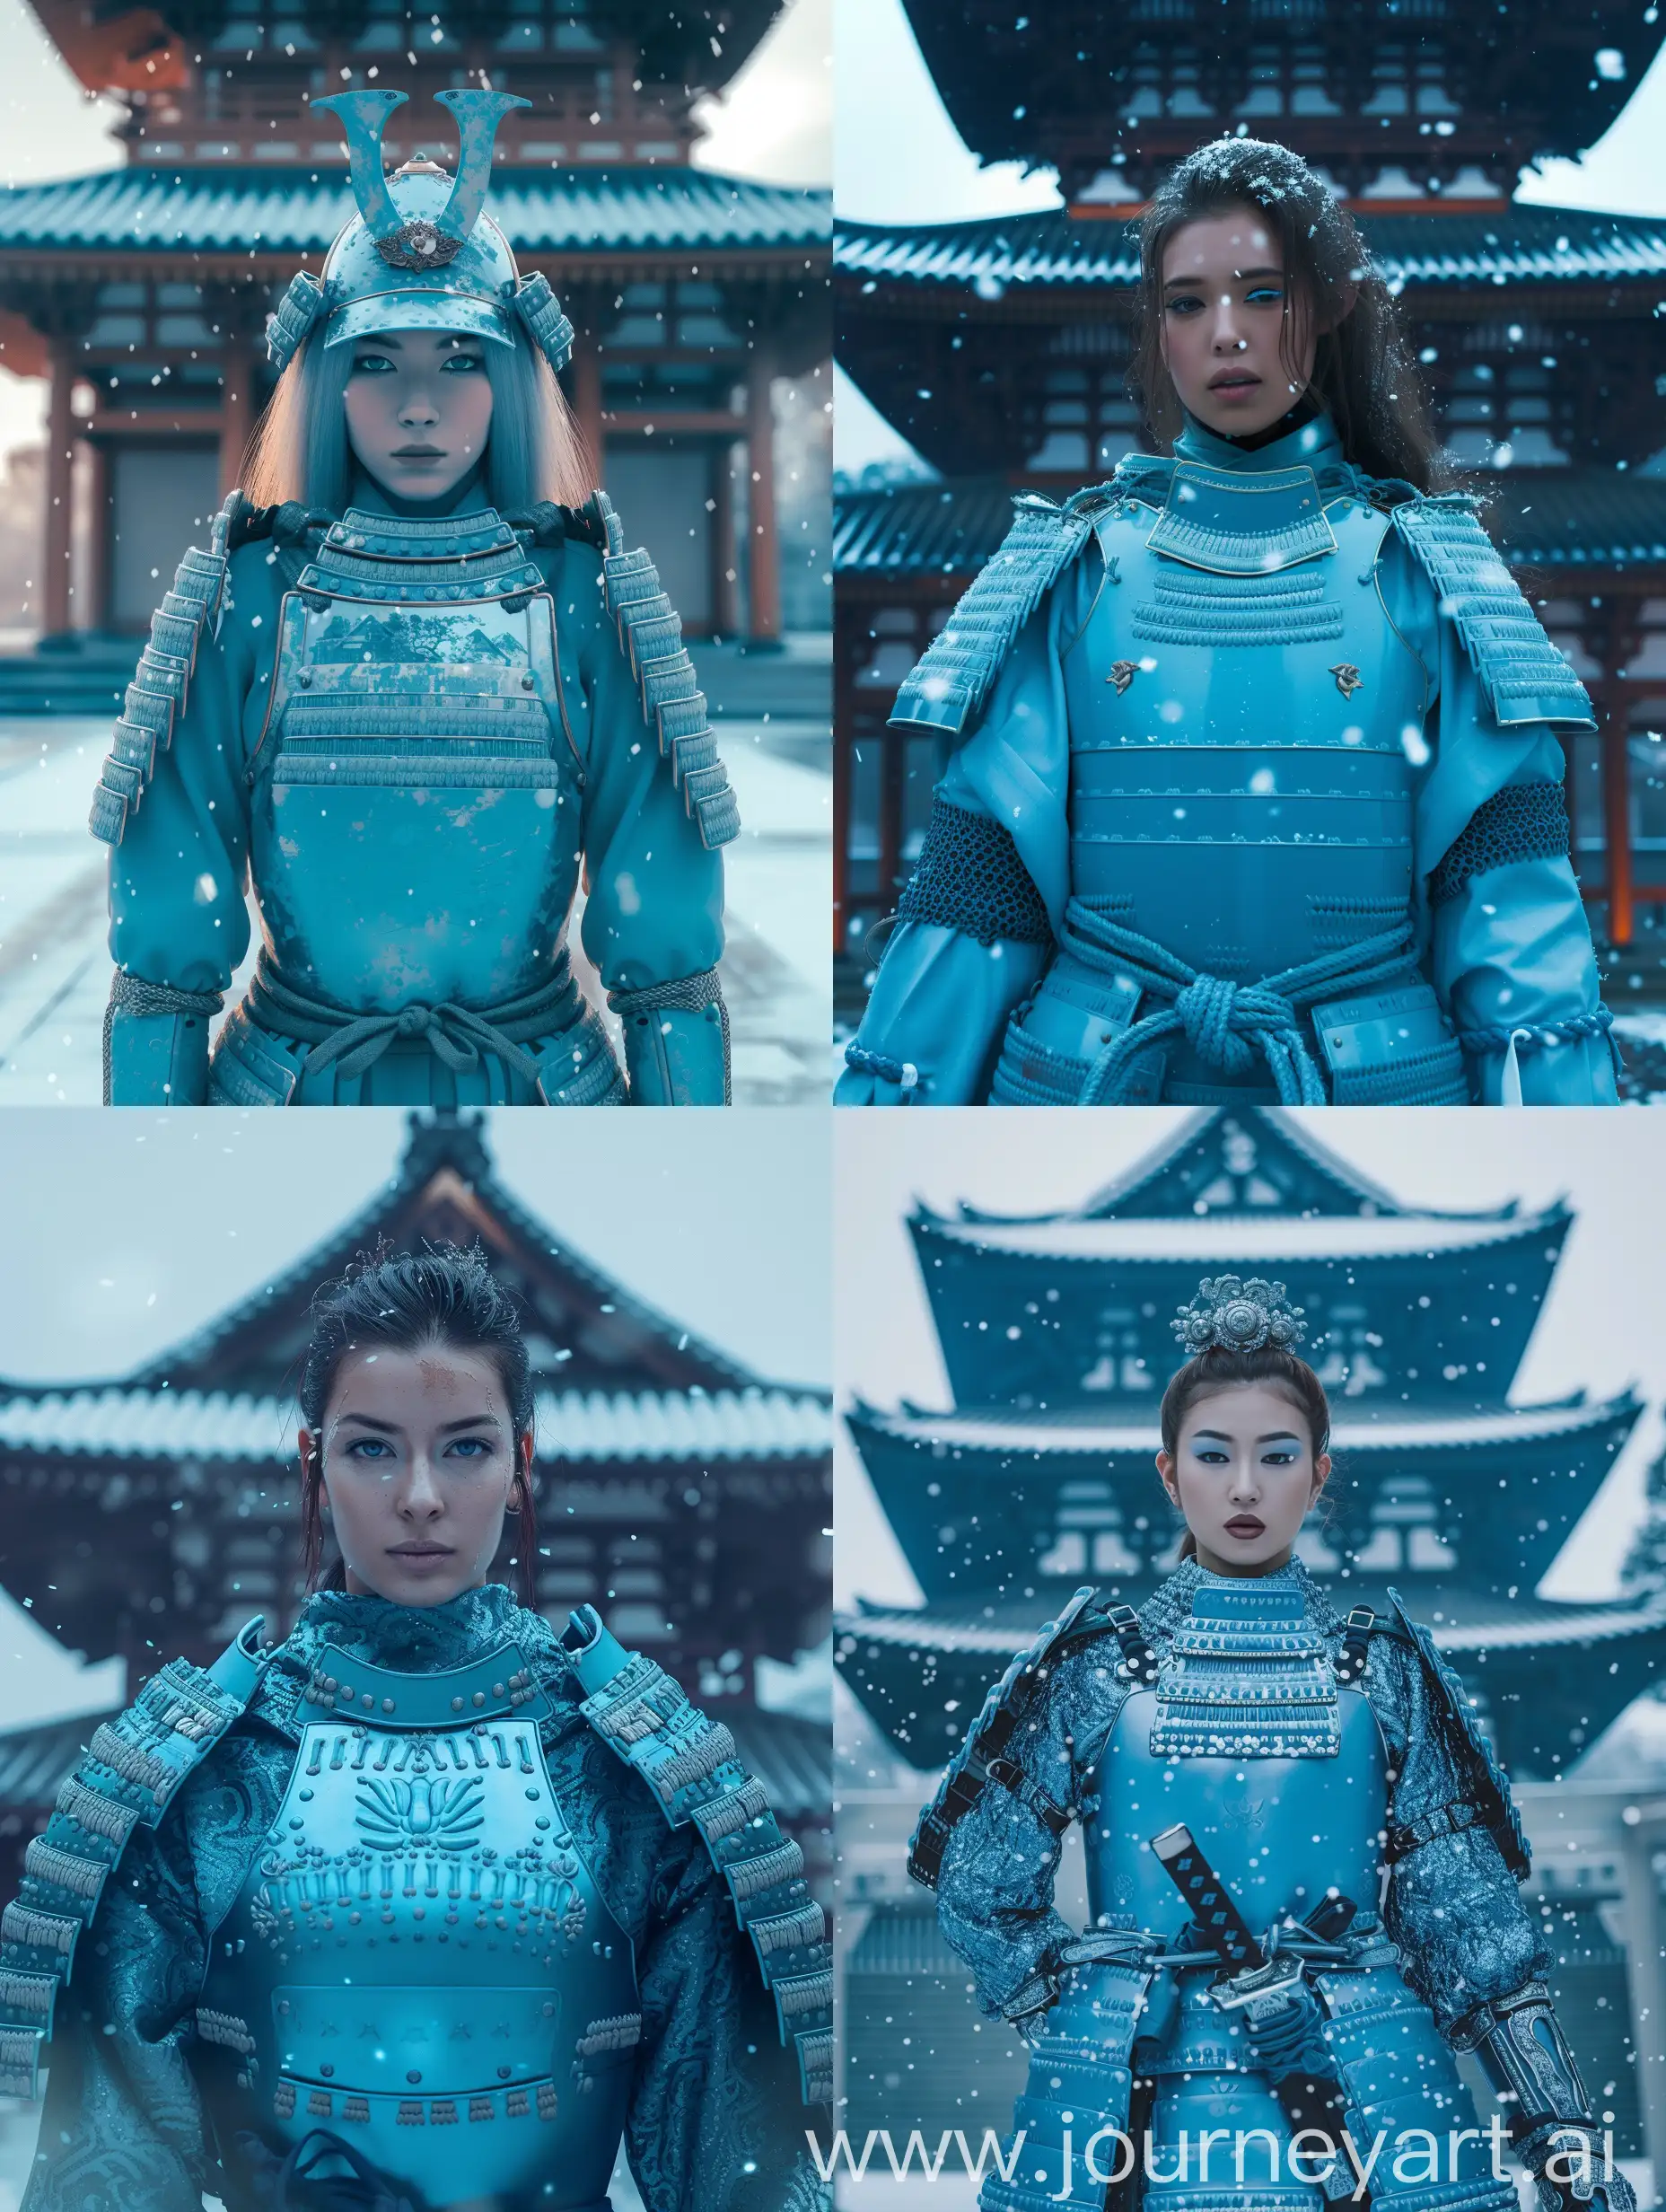 Character: A captivating and beautiful female samurai warrior, adorned in a resplendent ō-yoroi armor shining in a bright light blue hue, exuding elegance and strength.
Environment: The majestic backdrop of a Japanese temple, enveloped in tradition and serenity.
Background: A frontal view of a symmetrical Japanese temple, with its intricate architecture providing a harmonious setting for the scene.
Style: An opulent fashion editorial featuring the ō-yoroi armor in light blue, blending the timeless essence of the samurai with a contemporary twist.
Photography Type: Cinematic fashion editorial, capturing the essence of the blue ō-yoroi samurai warrior in a visually compelling manner.
Theme: A fashion editorial campaign celebrating the blue ō-yoroi samurai warrior, showcasing the fusion of tradition and modernity.
Visual Filters: Enhanced with a Fashion Film Look-Up Table (LUT), adding depth and richness to the visual narrative.
Camera Effects: Enriched with subtle camera blur, camera haze, and faithful representation of natural light to highlight the brilliance of the light blue armor.
Time: Set during a tranquil evening with light snowfall, creating a serene and enchanting atmosphere.
Resolution: Captured in high resolution, ensuring meticulous preservation of every intricate detail.
Key Element: The focal point is the bright light blue ō-yoroi armor, intricately detailed to capture natural light, enhancing its beauty and providing a stunning contrast against the temple backdrop.
Details: Rich and intricate, the bright light blue ō-yoroi armor features meticulously crafted details, reflecting the mastery of the artisans who created it and adding depth and presence to the character in the visual narrative.